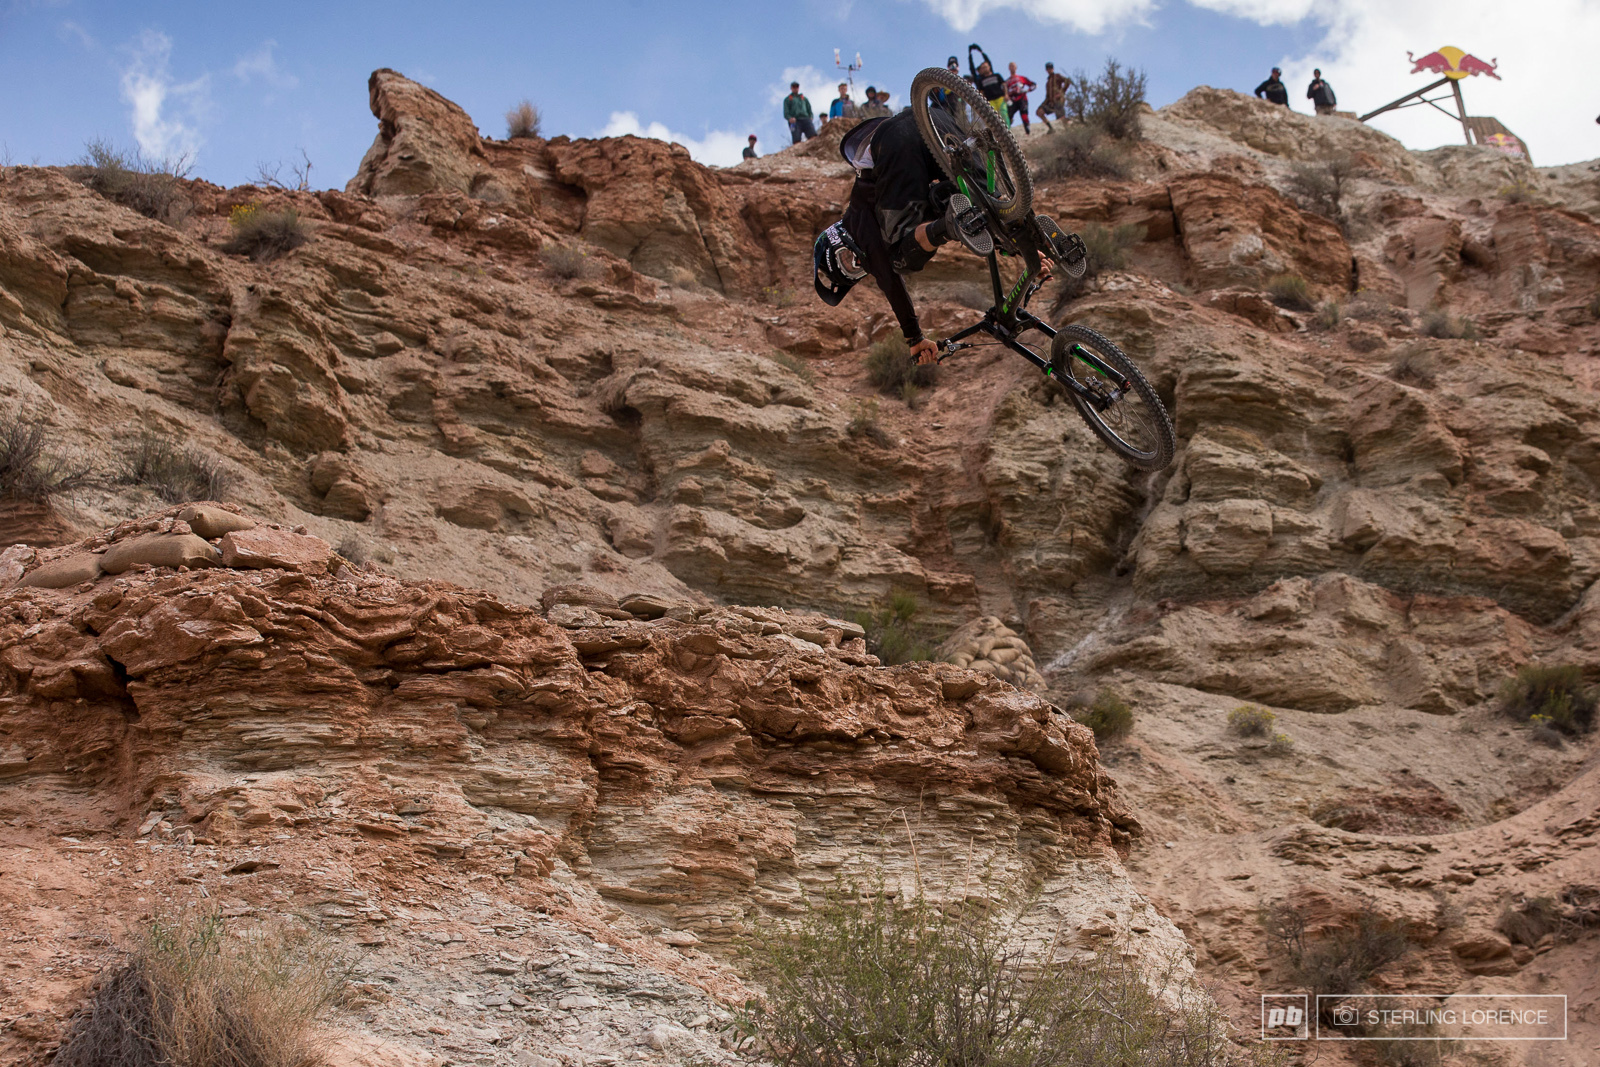 Dumped 3 cliff drop at the top, one of the gnarliest moves at the 2013 RedBull Rampage in Virgin, Utah